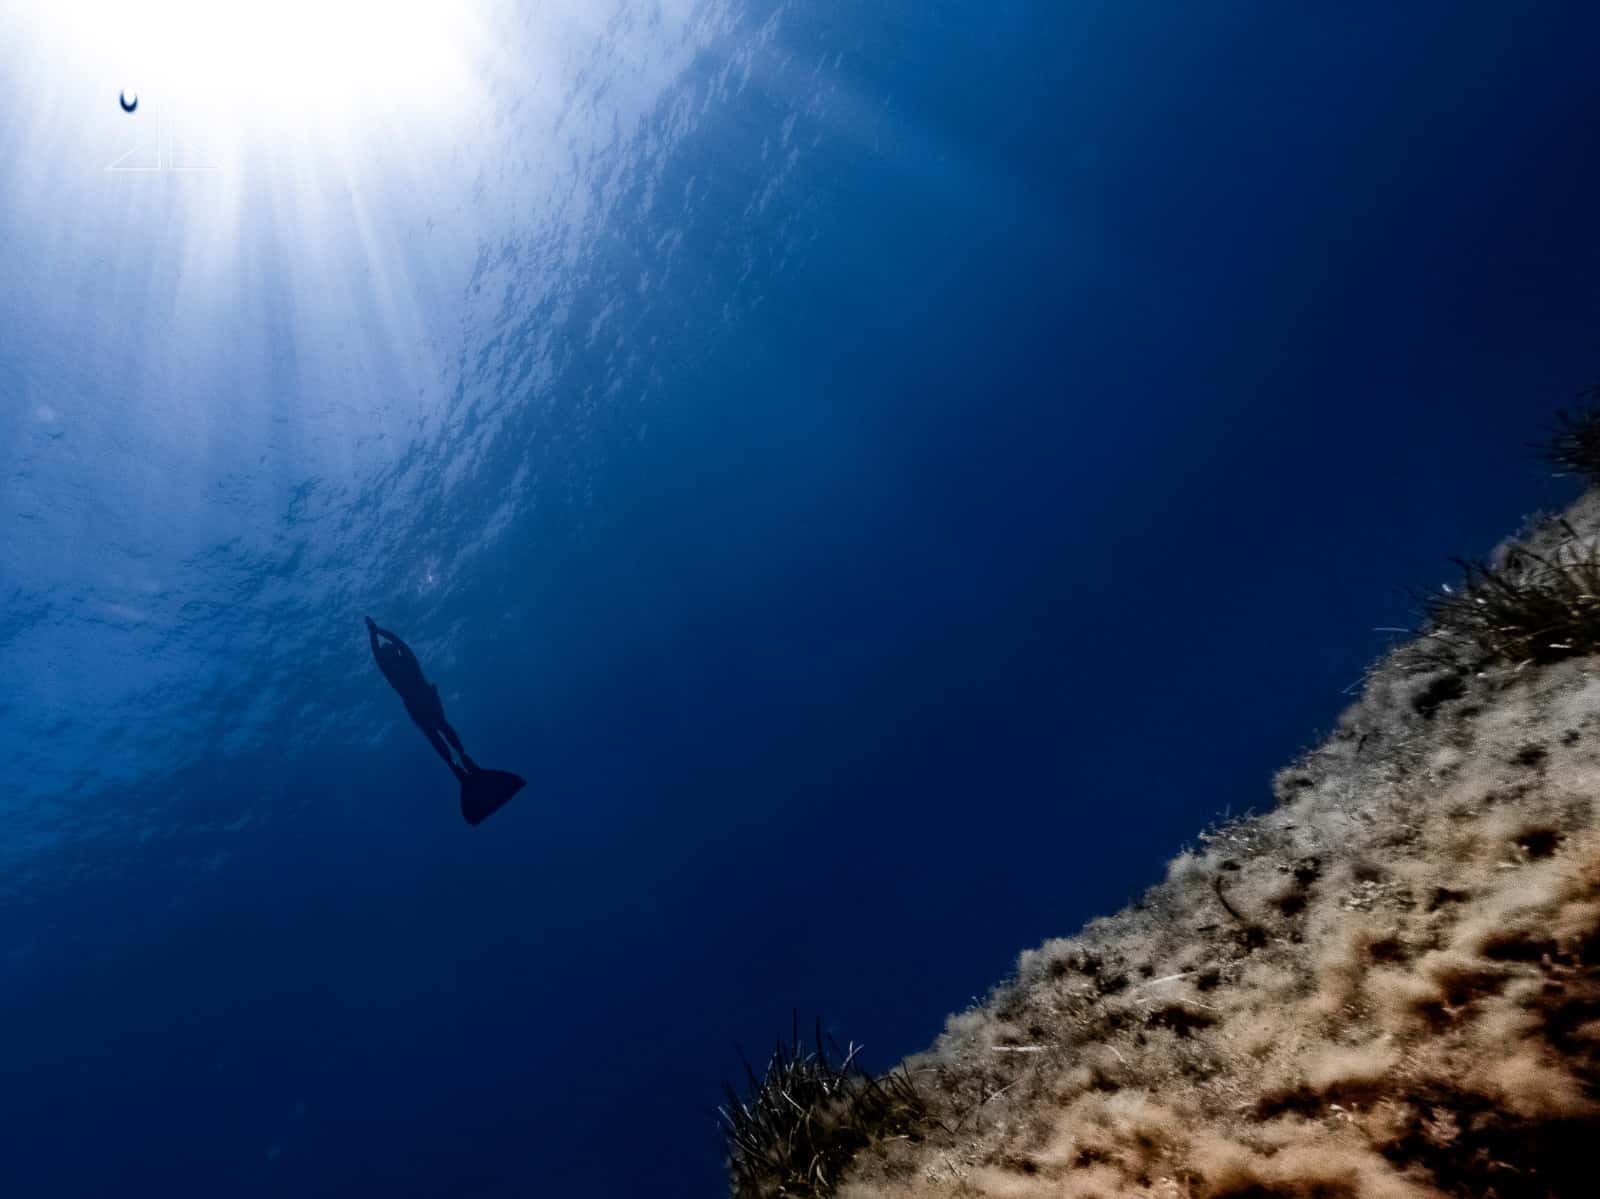 Freediver with mono-fin swims towards surface